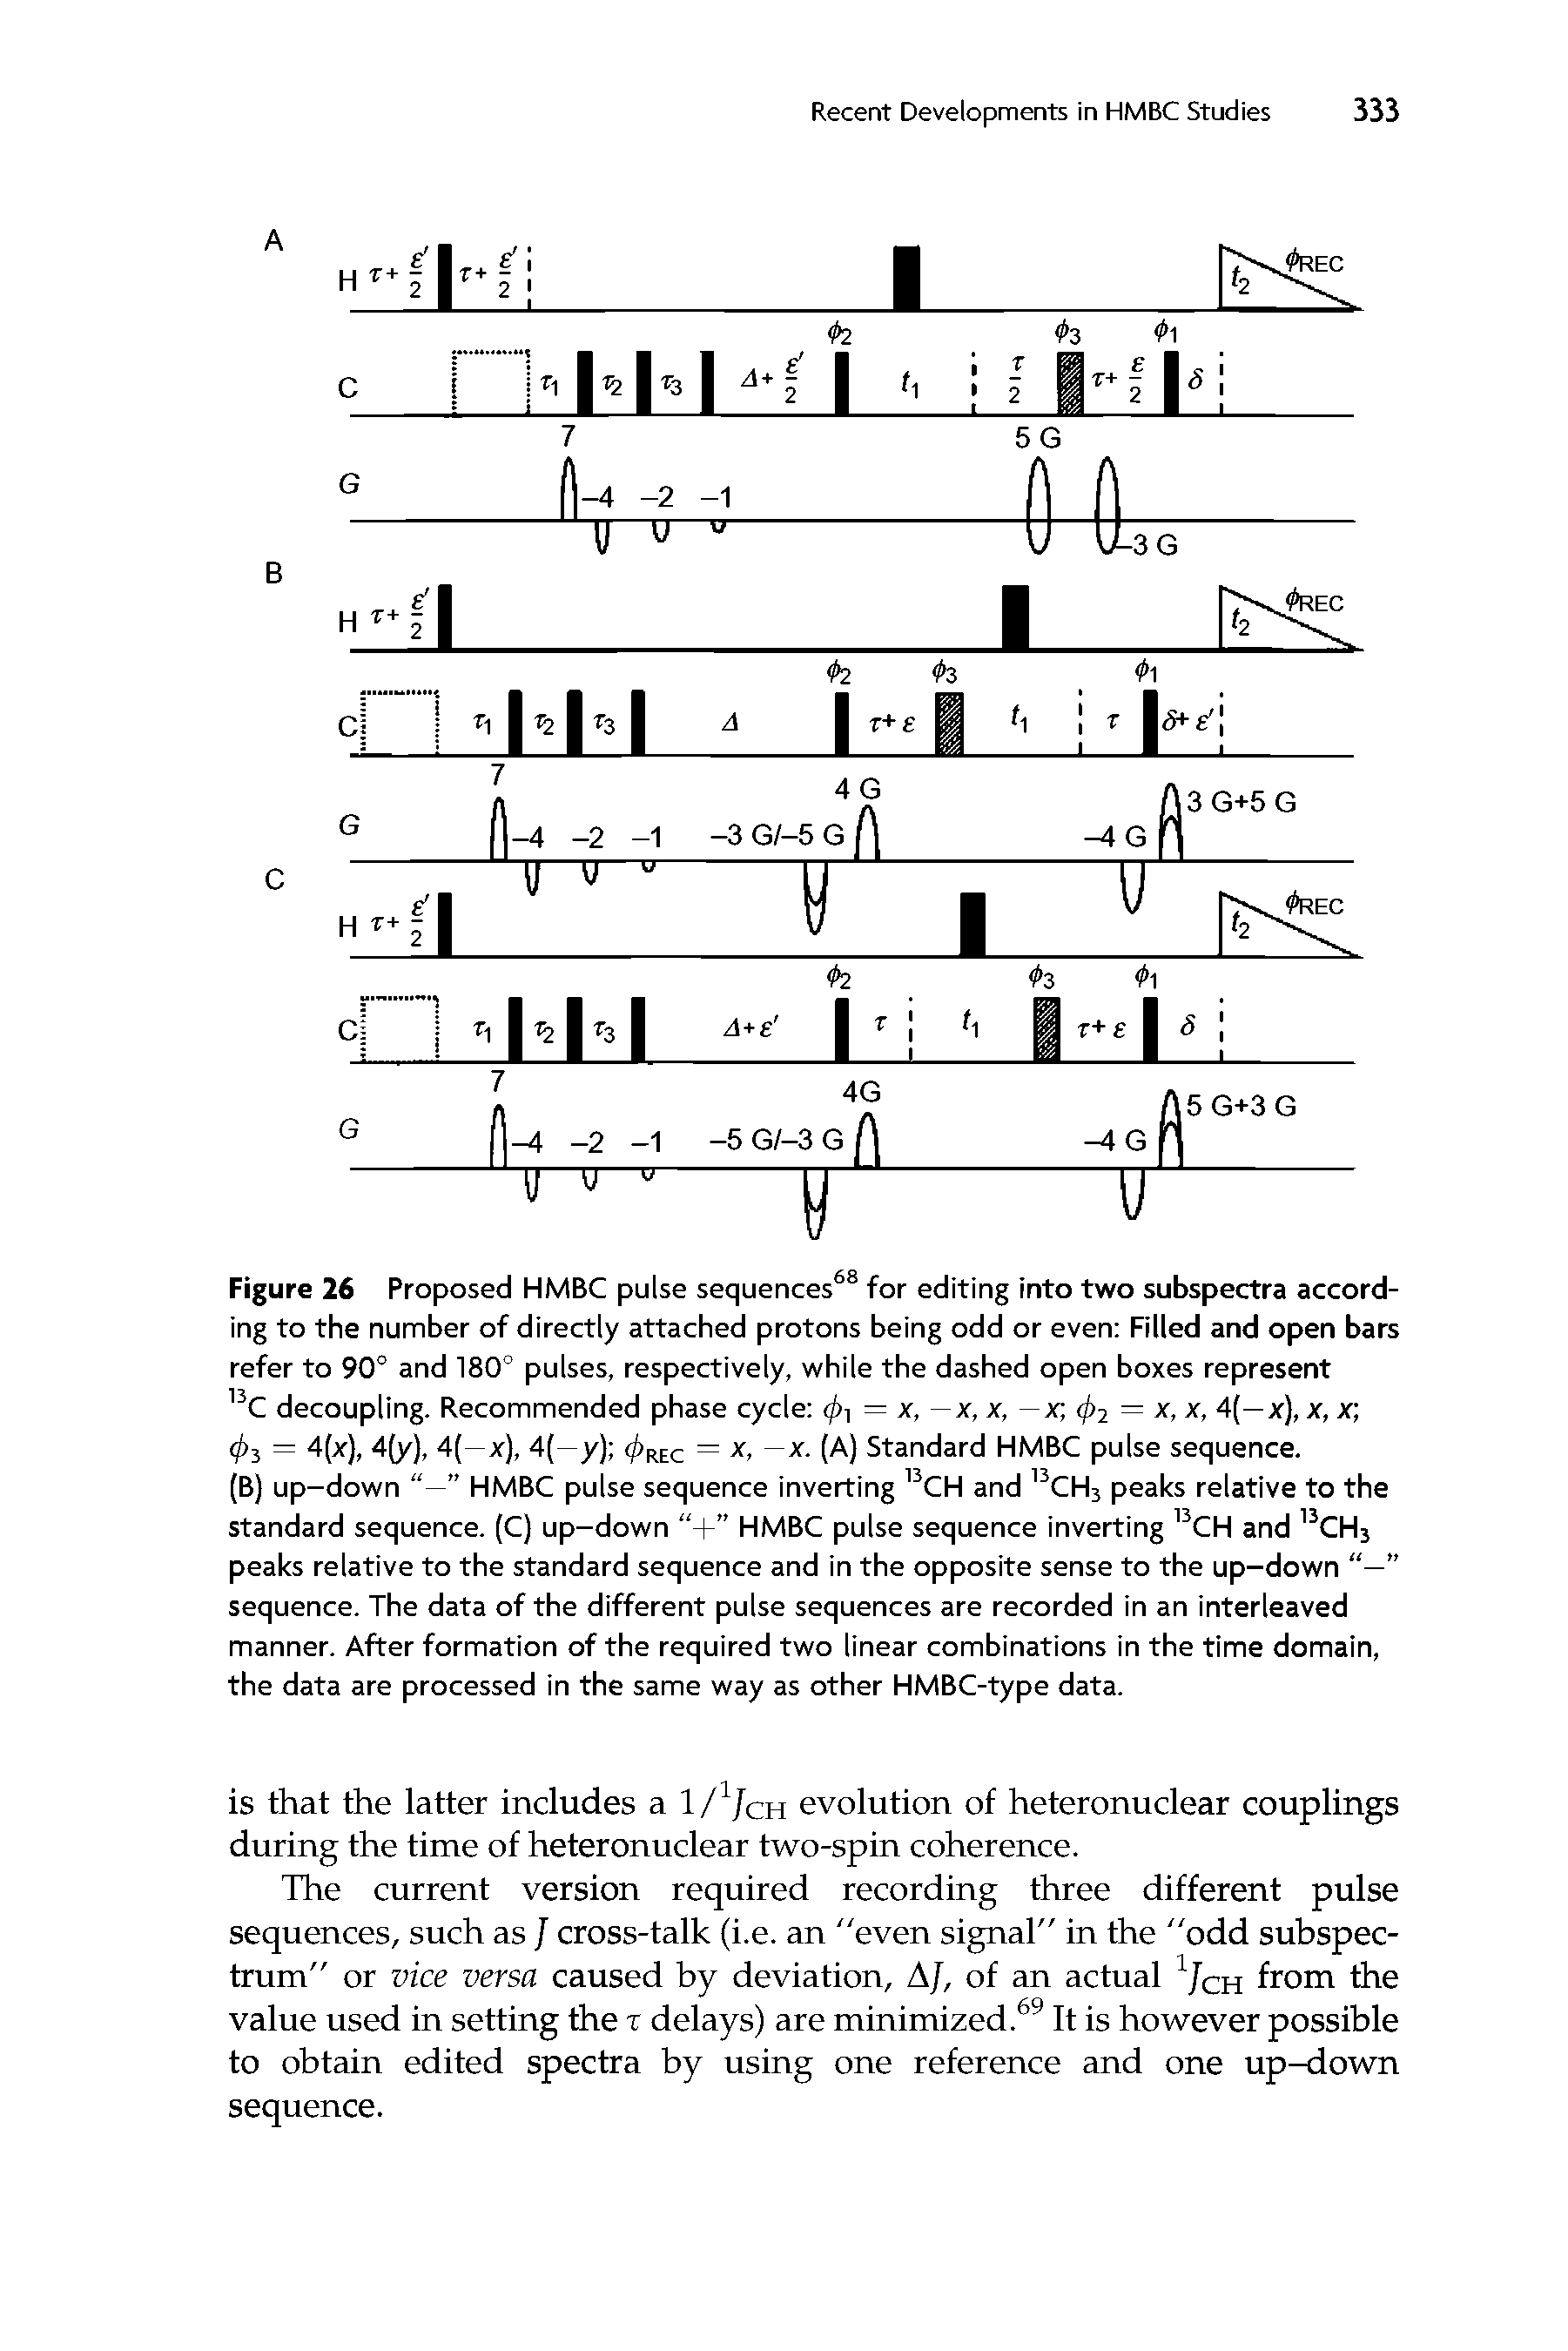 Figure 26 Proposed HMBC pulse sequences68 for editing into two subspectra according to the number of directly attached protons being odd or even Filled and open bars refer to 90° and 180° pulses, respectively, while the dashed open boxes represent 13C decoupling. Recommended phase cycle 0 — x, —x, x, — x 02 = x, x, 4(—x), x, x ...